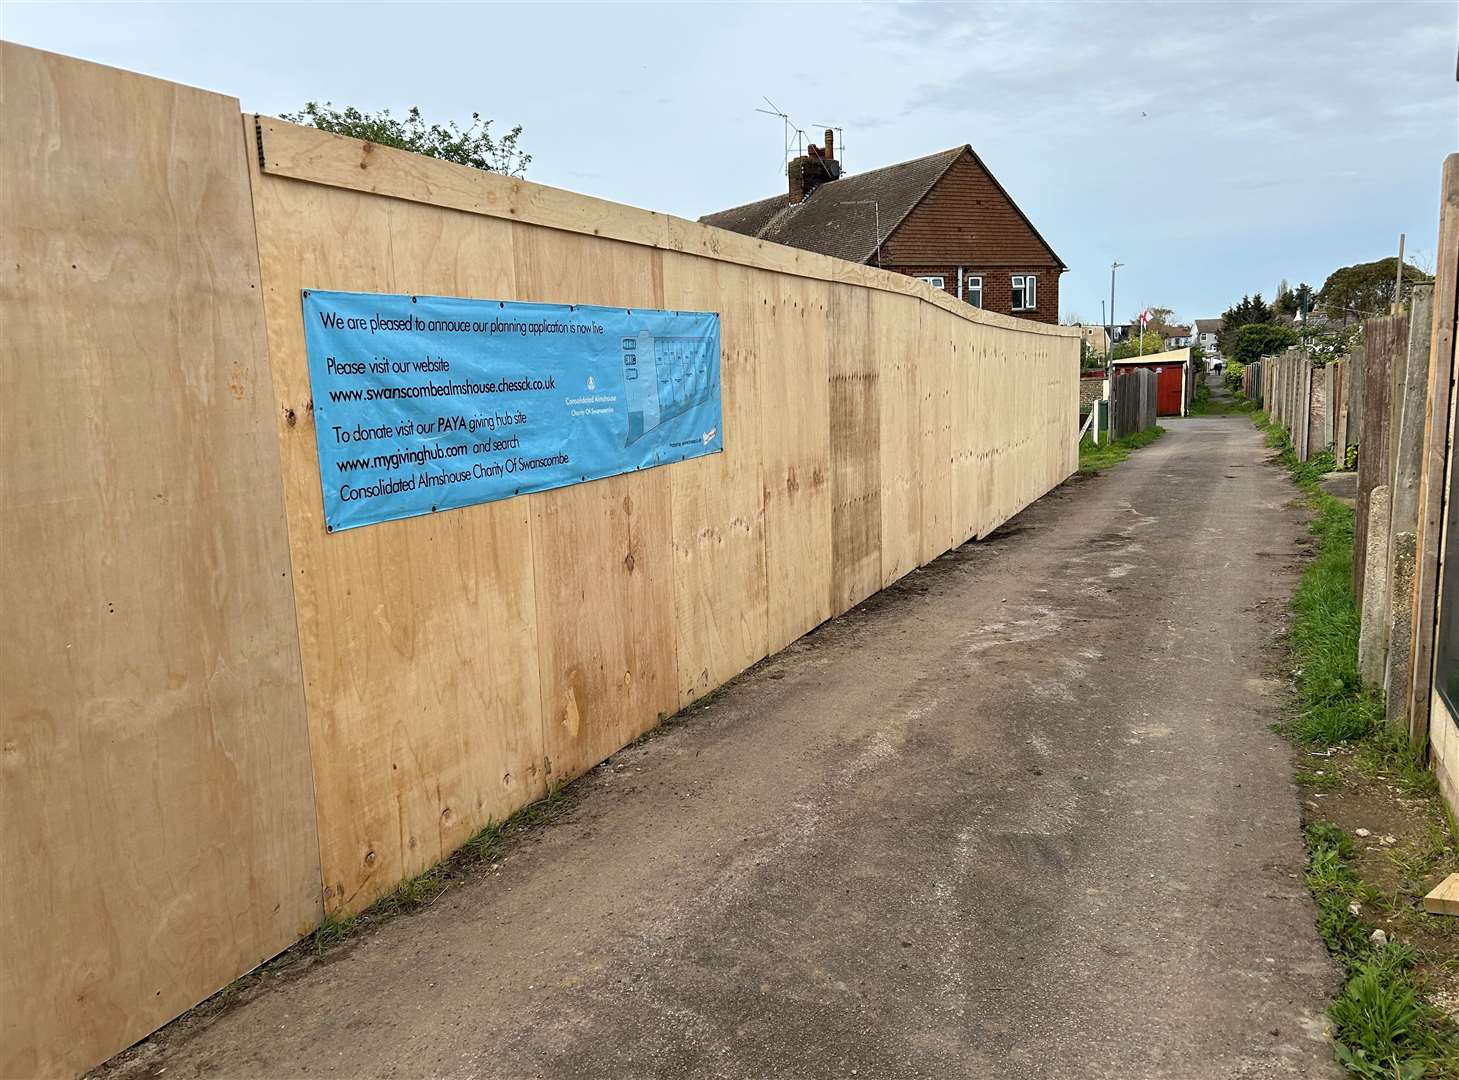 Construction is due to begin on new social homes for retirees in Milton Road, Swanscombe. Photo credit: Swanscombe Almshouse Charity